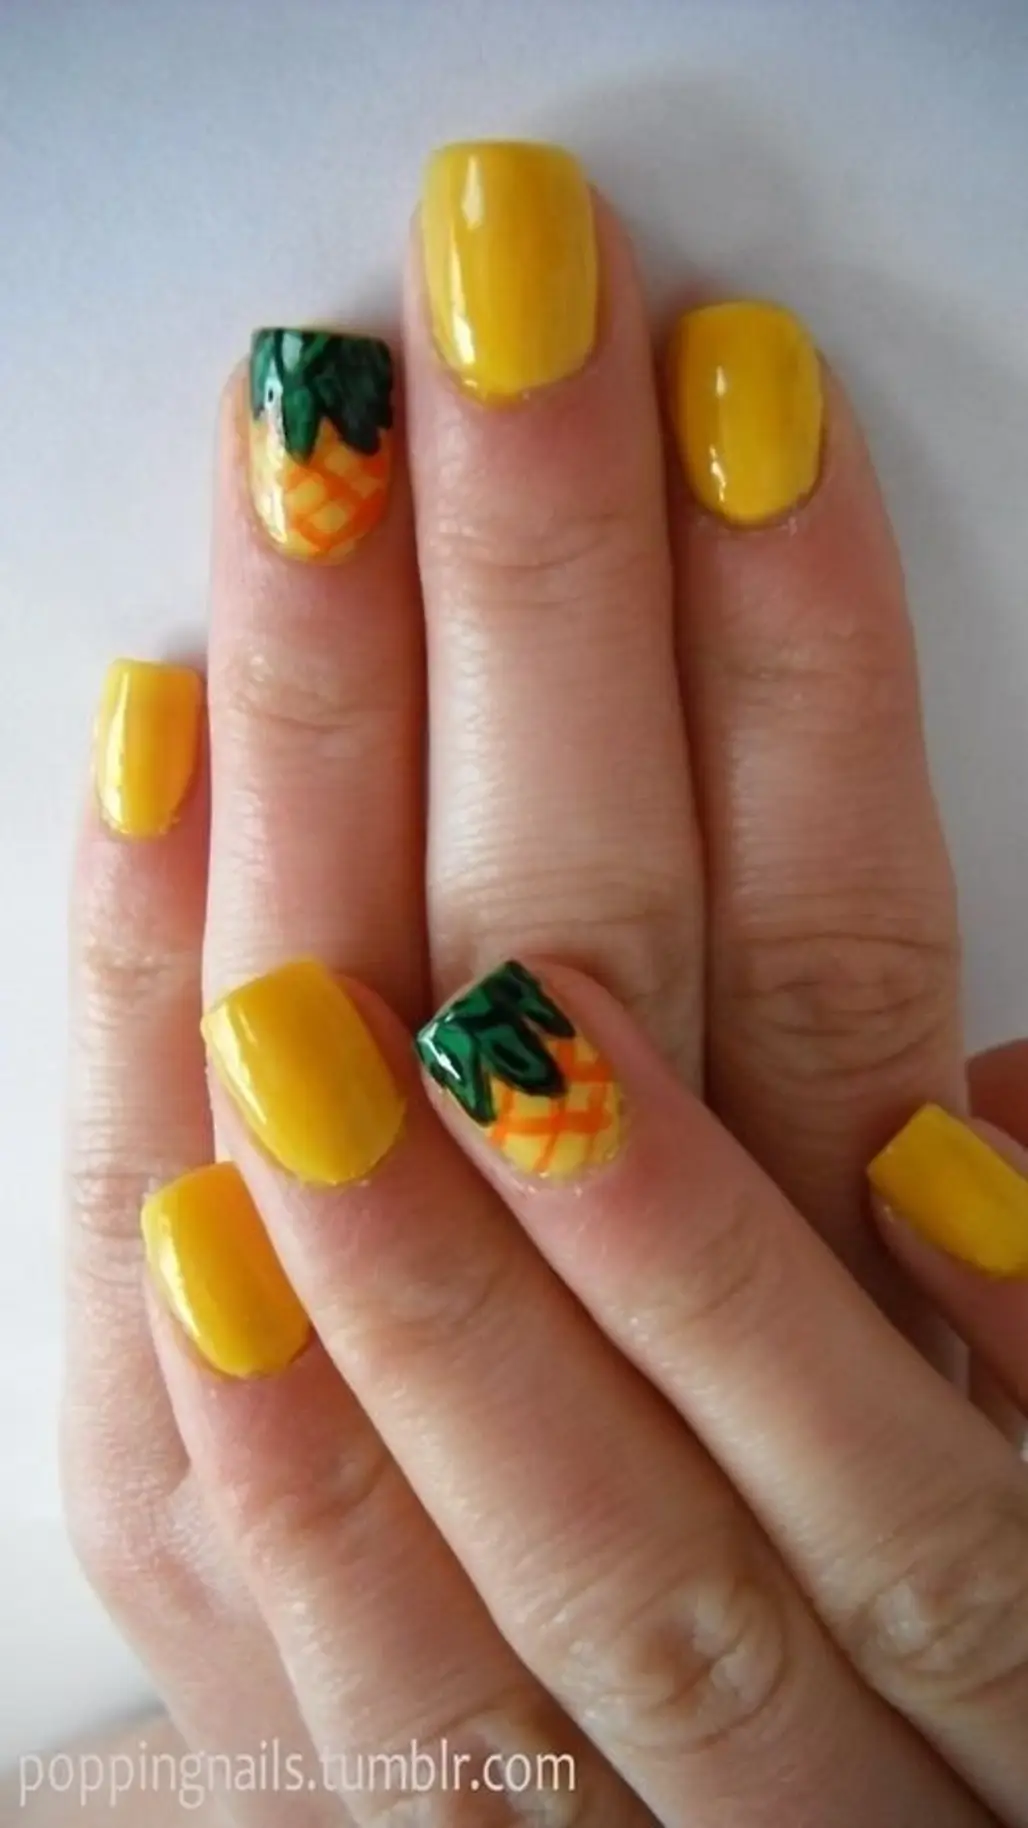 Pineapple Nails